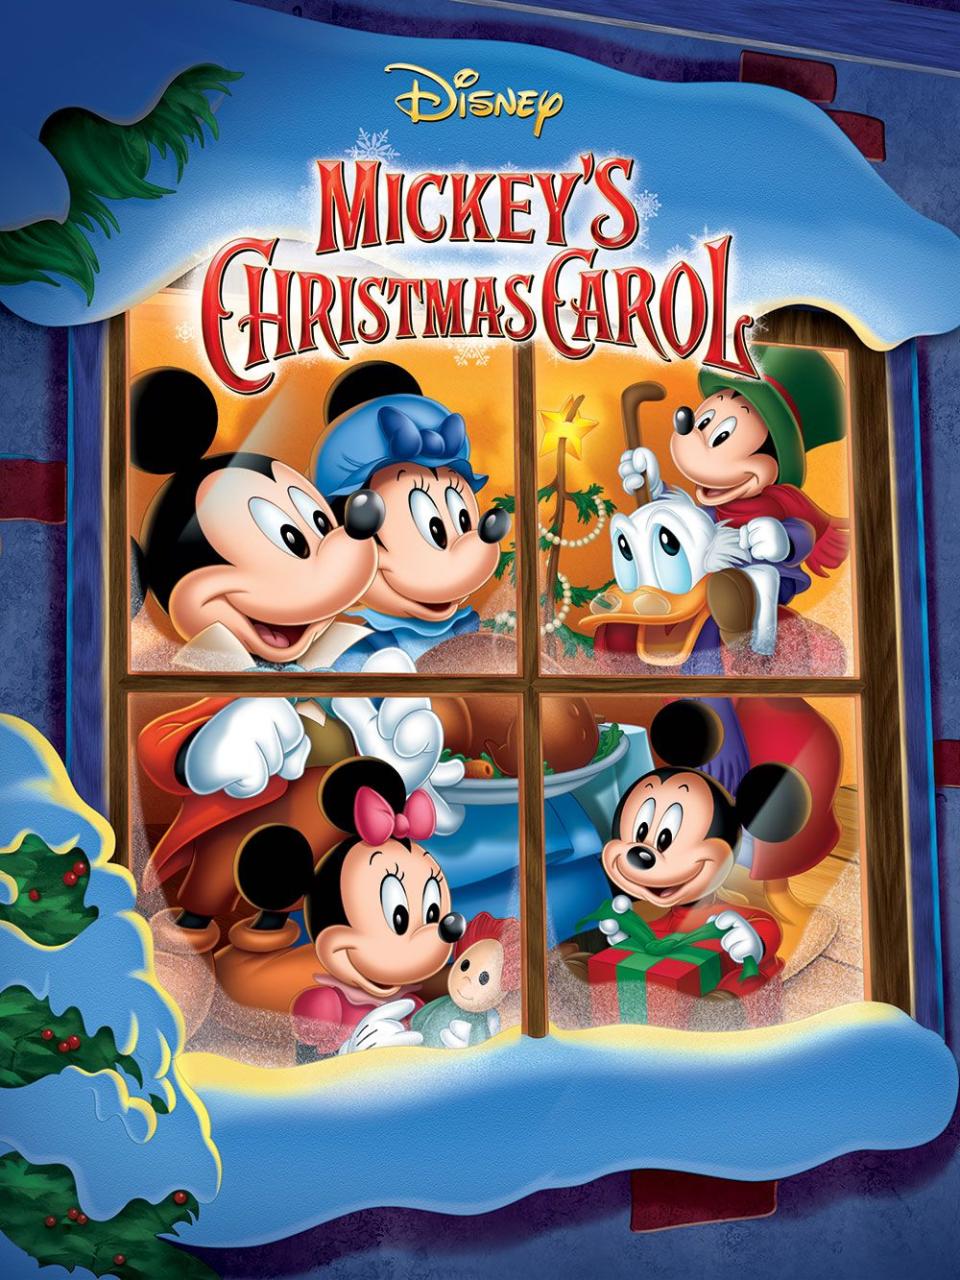 37 Best Disney Christmas Movies for a Magical Holiday Season